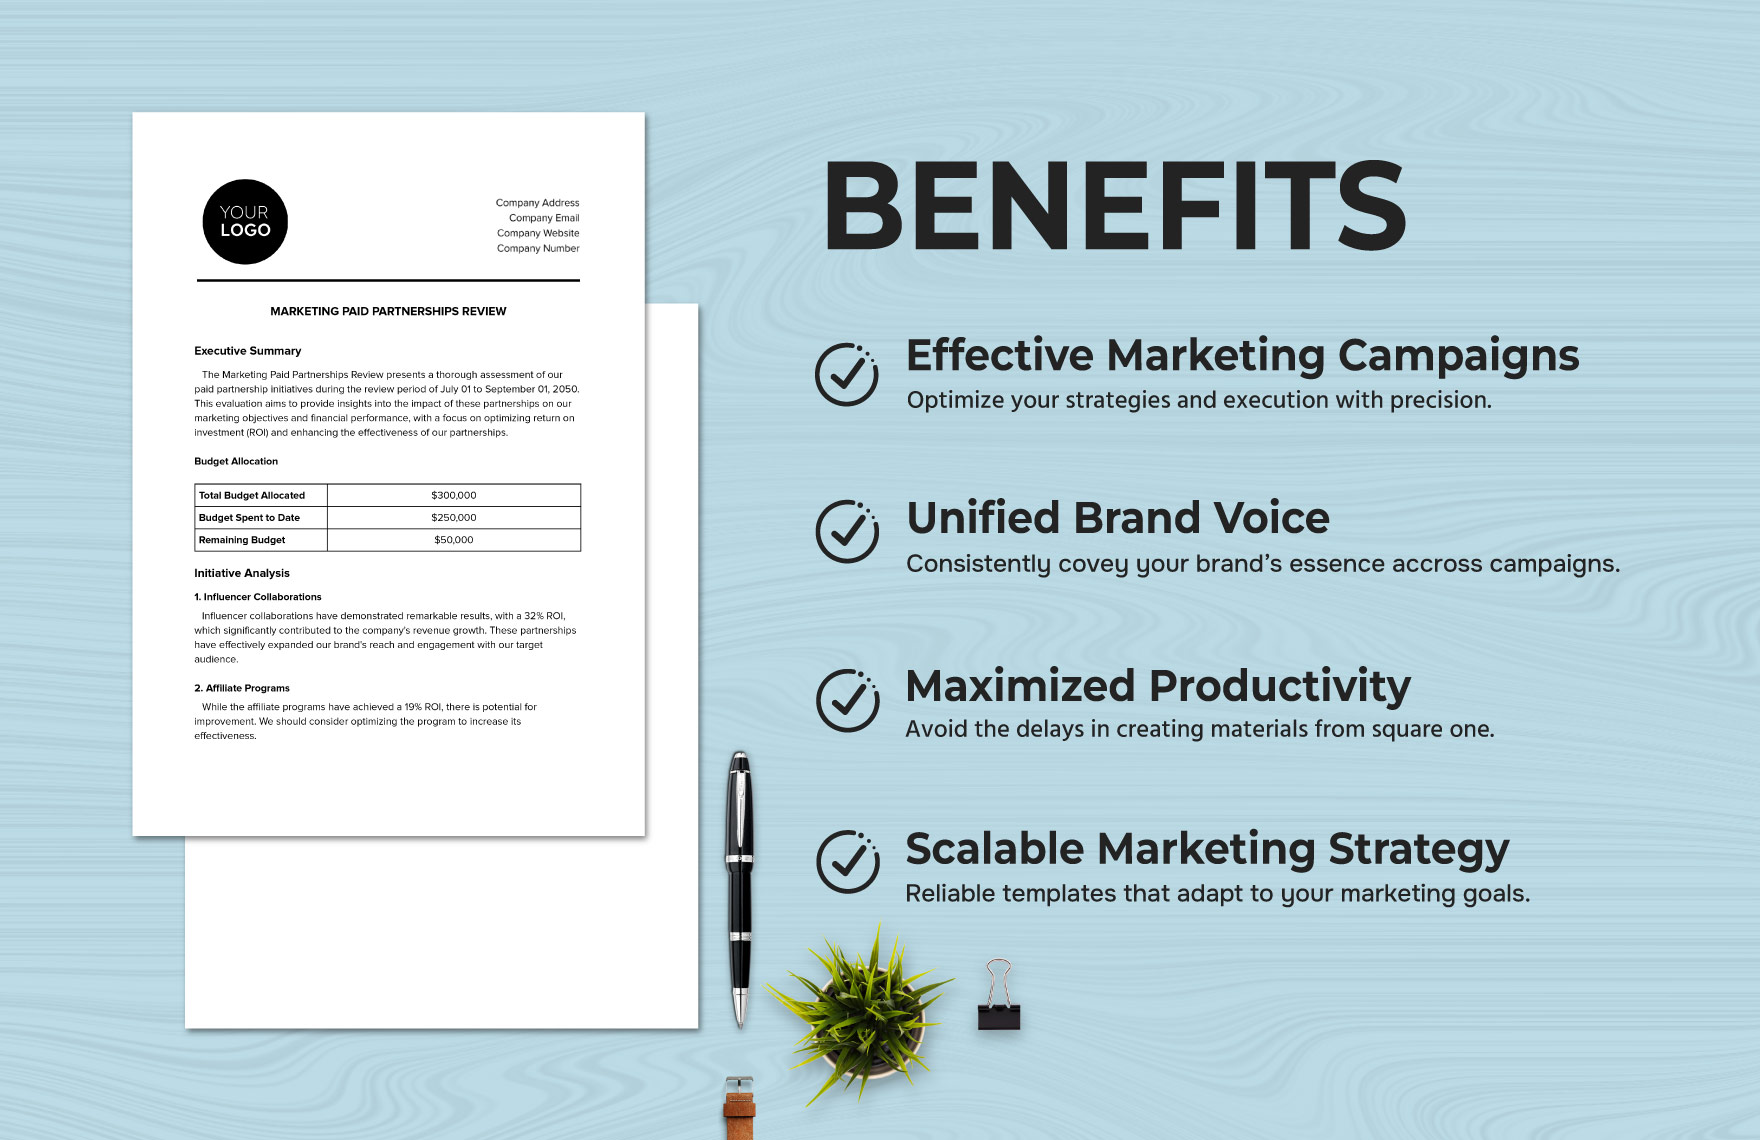 Marketing Paid Partnerships Review Template